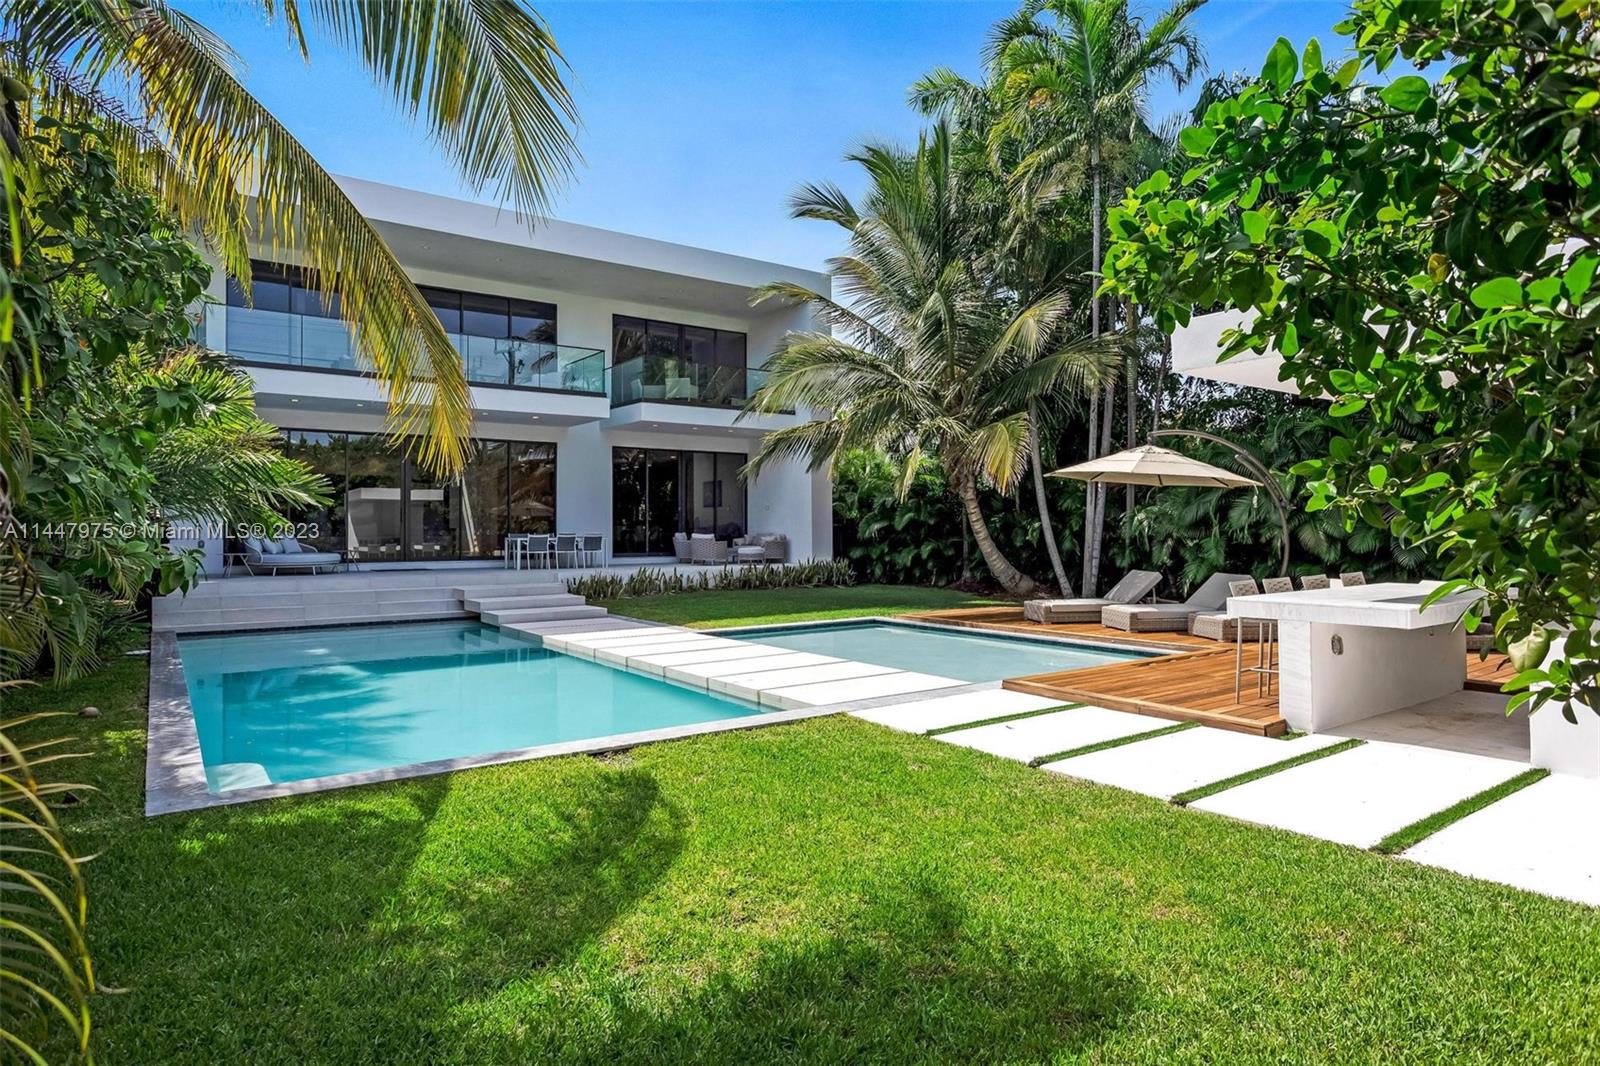 BRAND NEW TROPICAL MODERN VILLA ON PRESTIGIOUS MIAMI BEACH GOLF COURSE WITH GORGEOUS SUNSET VIEWS! Generous 10,400 SF LOT w/ 5 Bedrooms + 6 Baths encompassing 5,301 Adj Gross SF. Seamless Indoor/Outdoor Living Spaces + 11 FT High Ceilings Wrapped in Walls of Glass for Natural Light. Chef’s Eat-in Kitchen w/ Stainless Steel Appliances + Wine Refrigerator. Black Matte European Lighting t/o. Expansive Master Suite w/ Huge Terrace Overlooking Pool + Large Walk-in Master Closet wrapped in Marble & Oakwood. Master Bath has Freestanding Tub & Floating Double Vanity. Entertain Outdoors by Large Pool, Deck + Bar. Enjoy Magical Sunset Views from Private Rooftop Deck over the Miami Beach Golf Course. 2 car Garage w/ space for Lifts to fit 4 cars